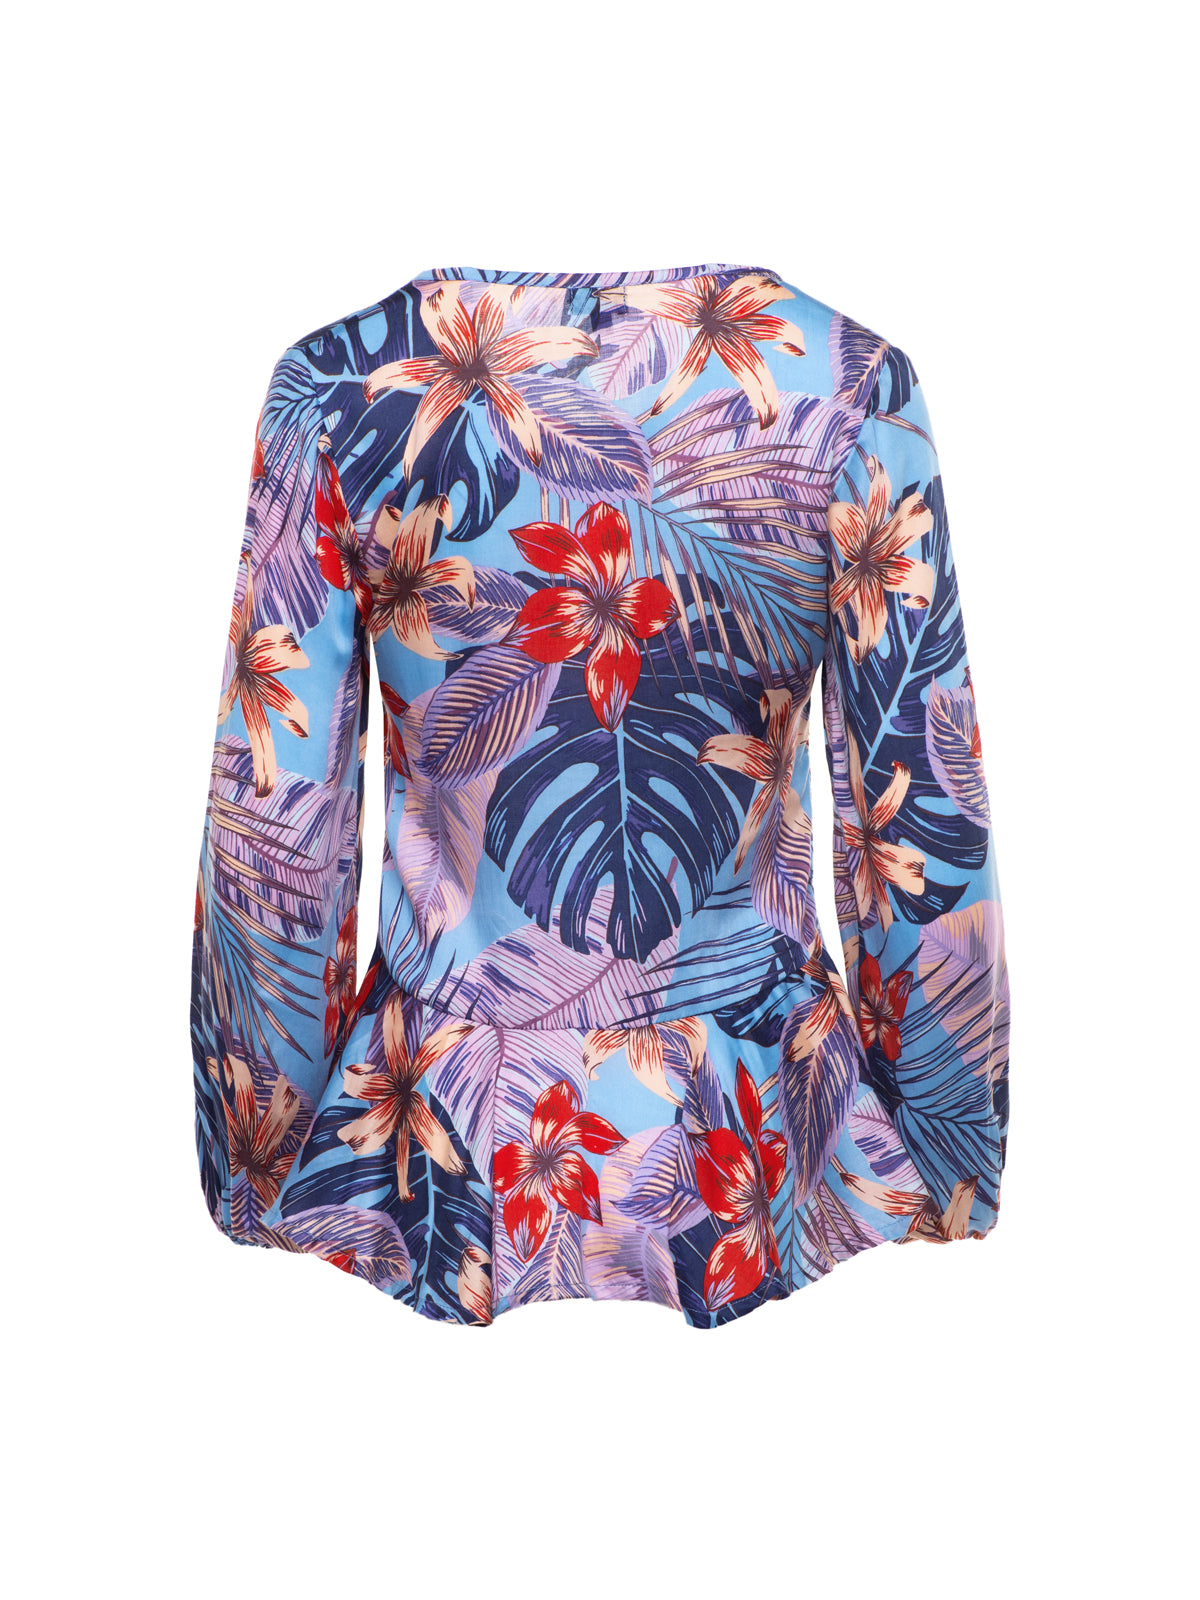 Cleo Blouse | Sustainable Printed Blouse | TAMGA Designs